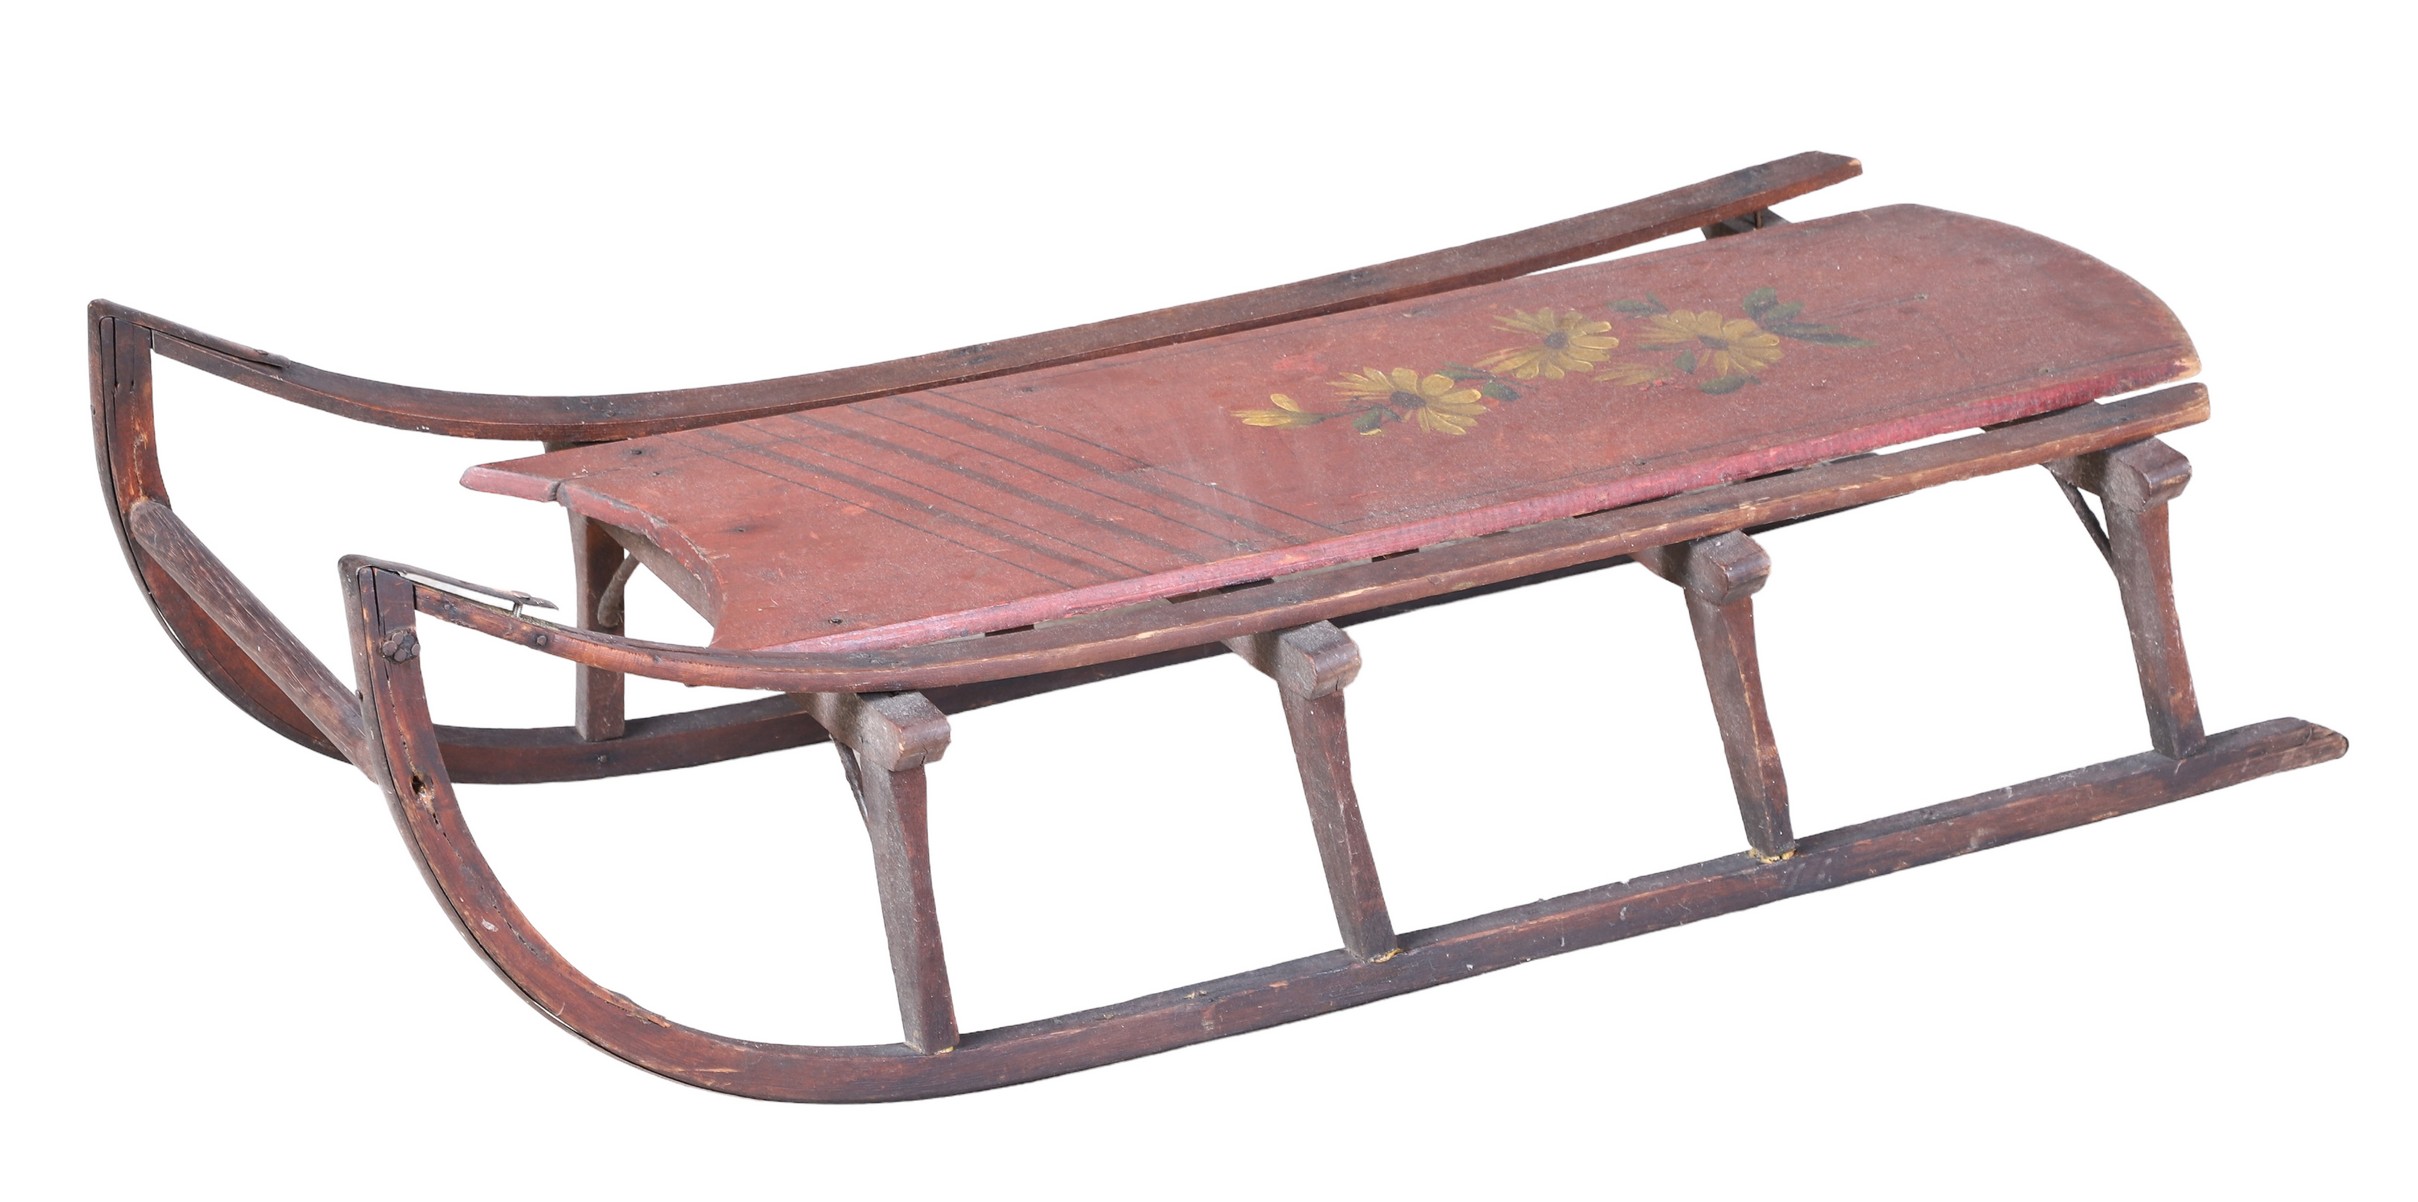 Painted wood childs sleigh with